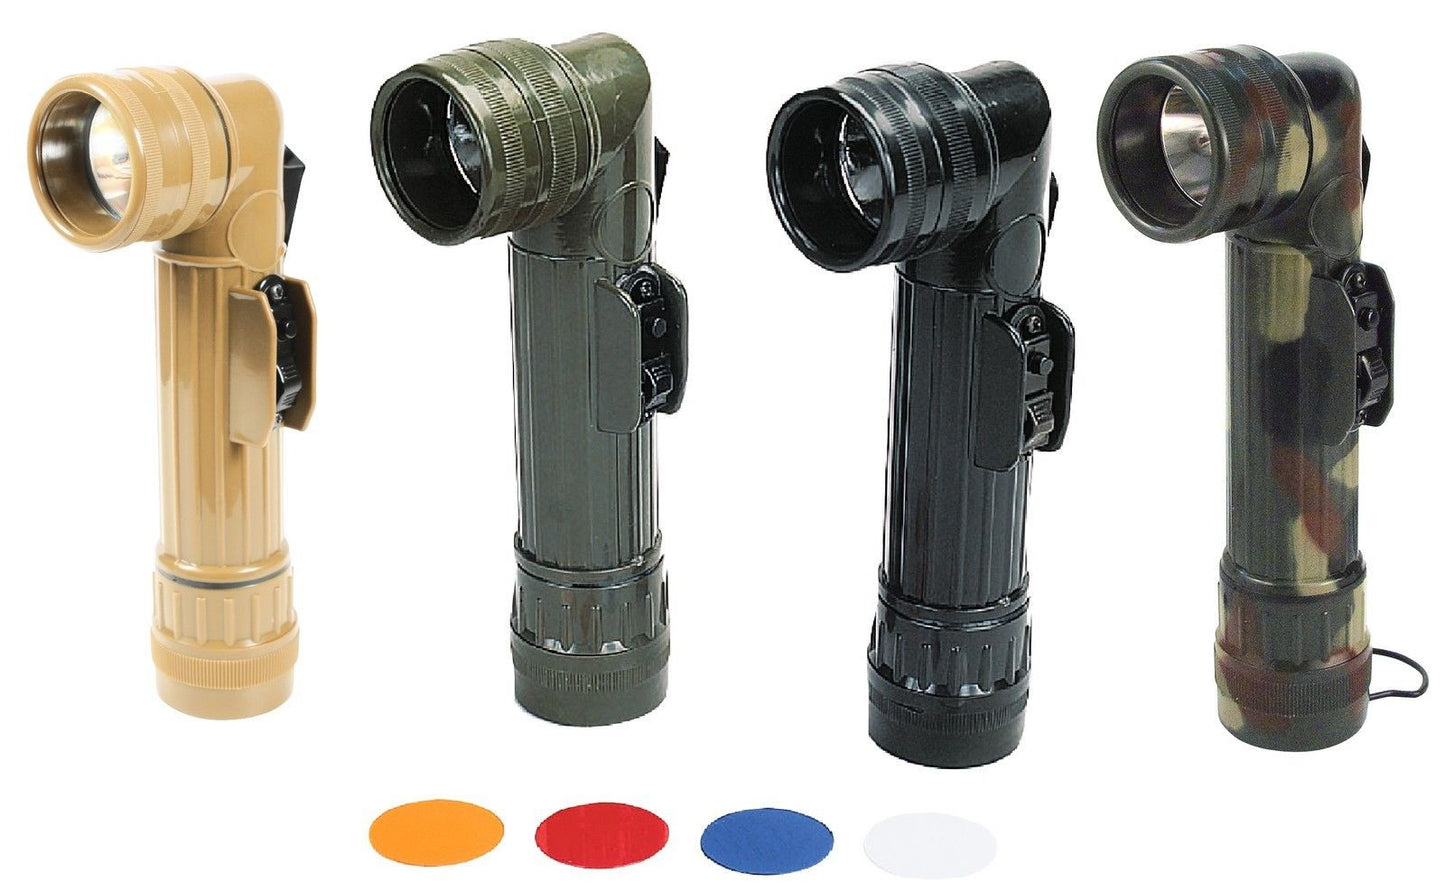 G.I. Type D-Cell Flashlights - Flash Lights with Extra Lenses